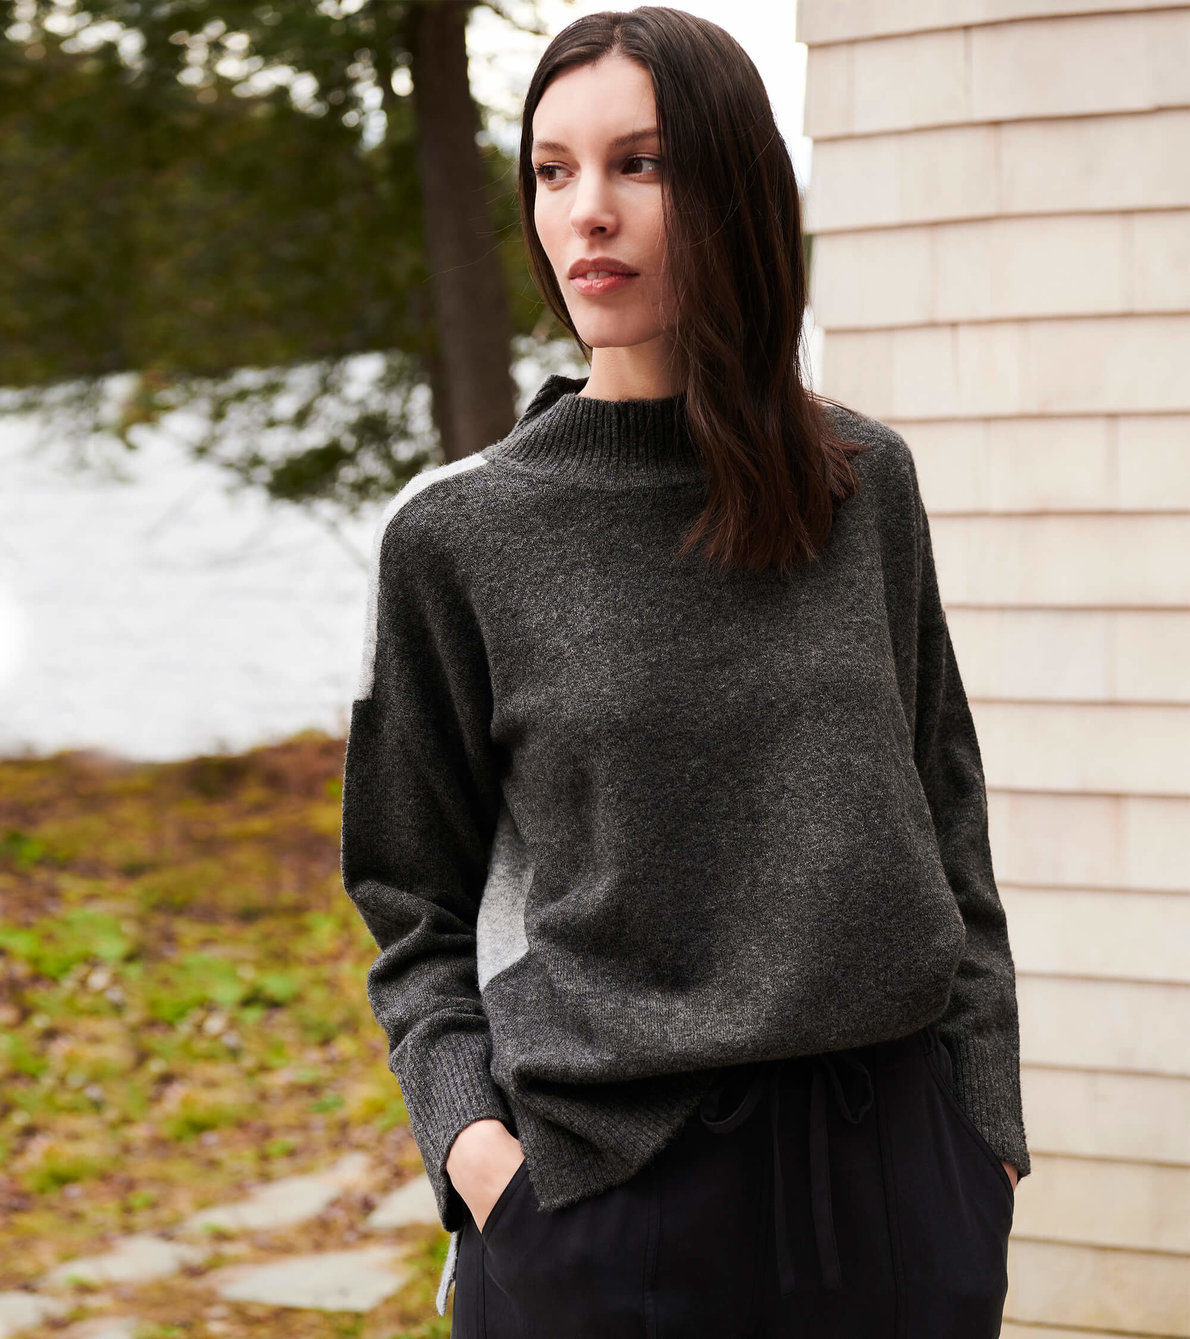 View larger image of Mock Neck Sweater - Charcoal Color Block